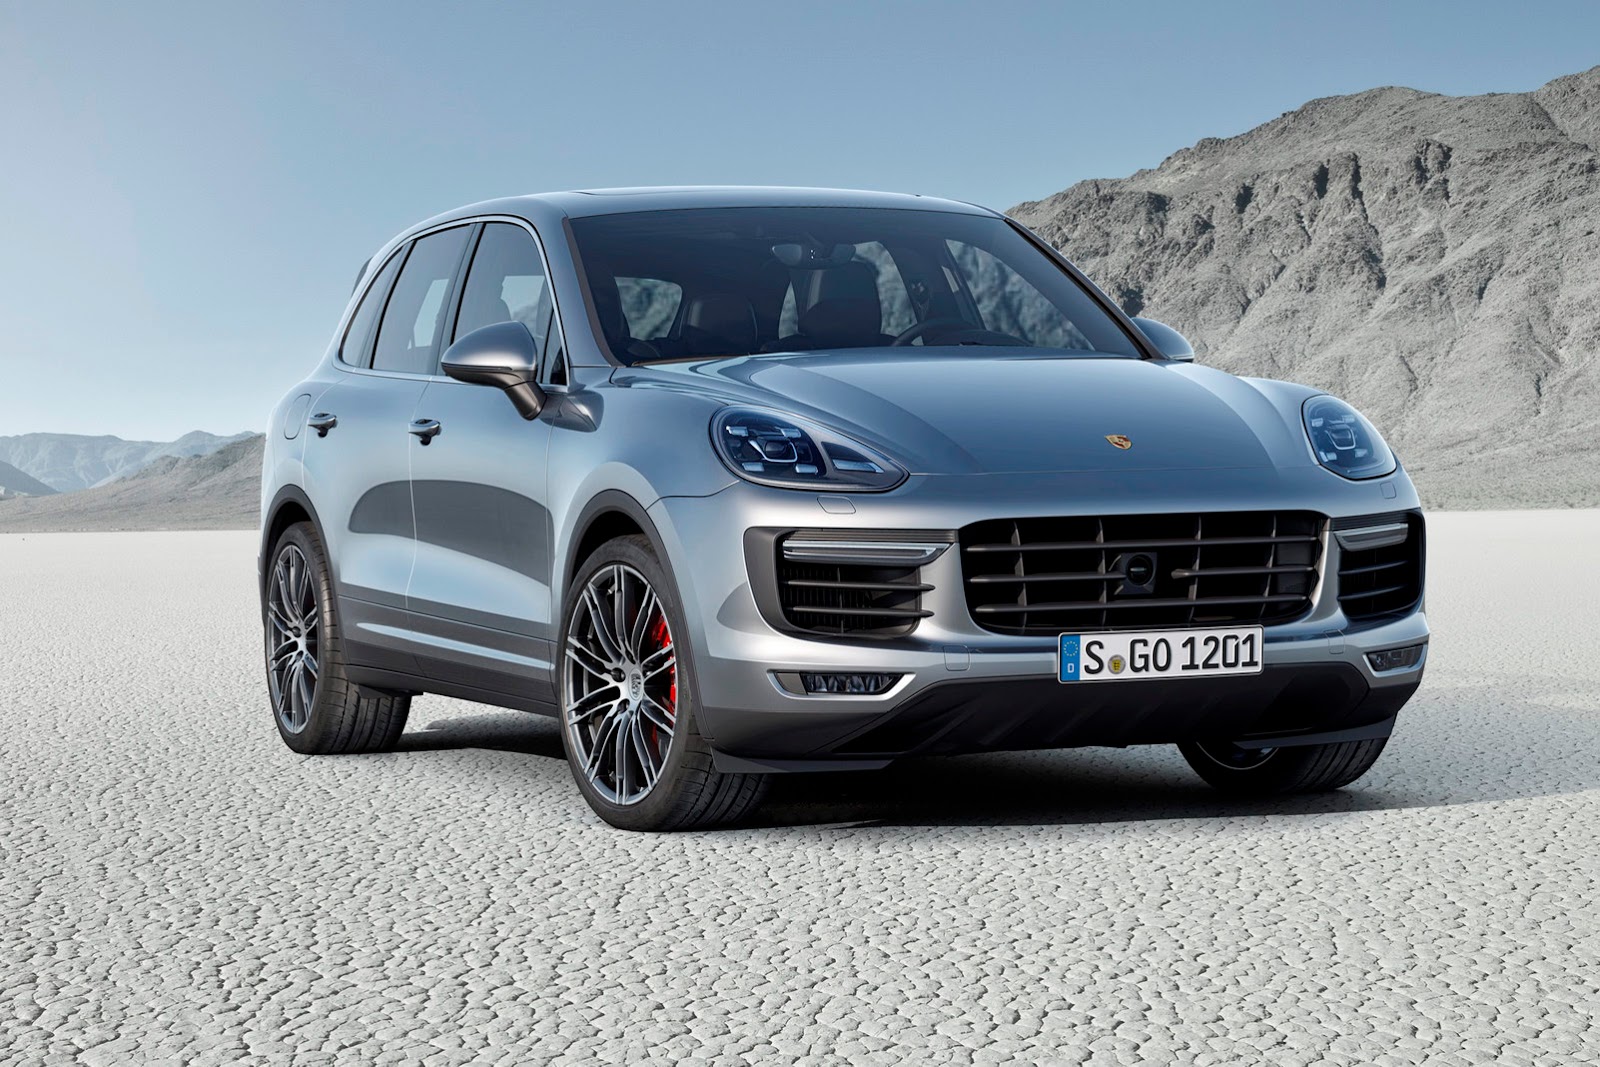 2015 Porsche Cayenne Facelift Revealed, Gets 410HP Plug-in Hybrid and